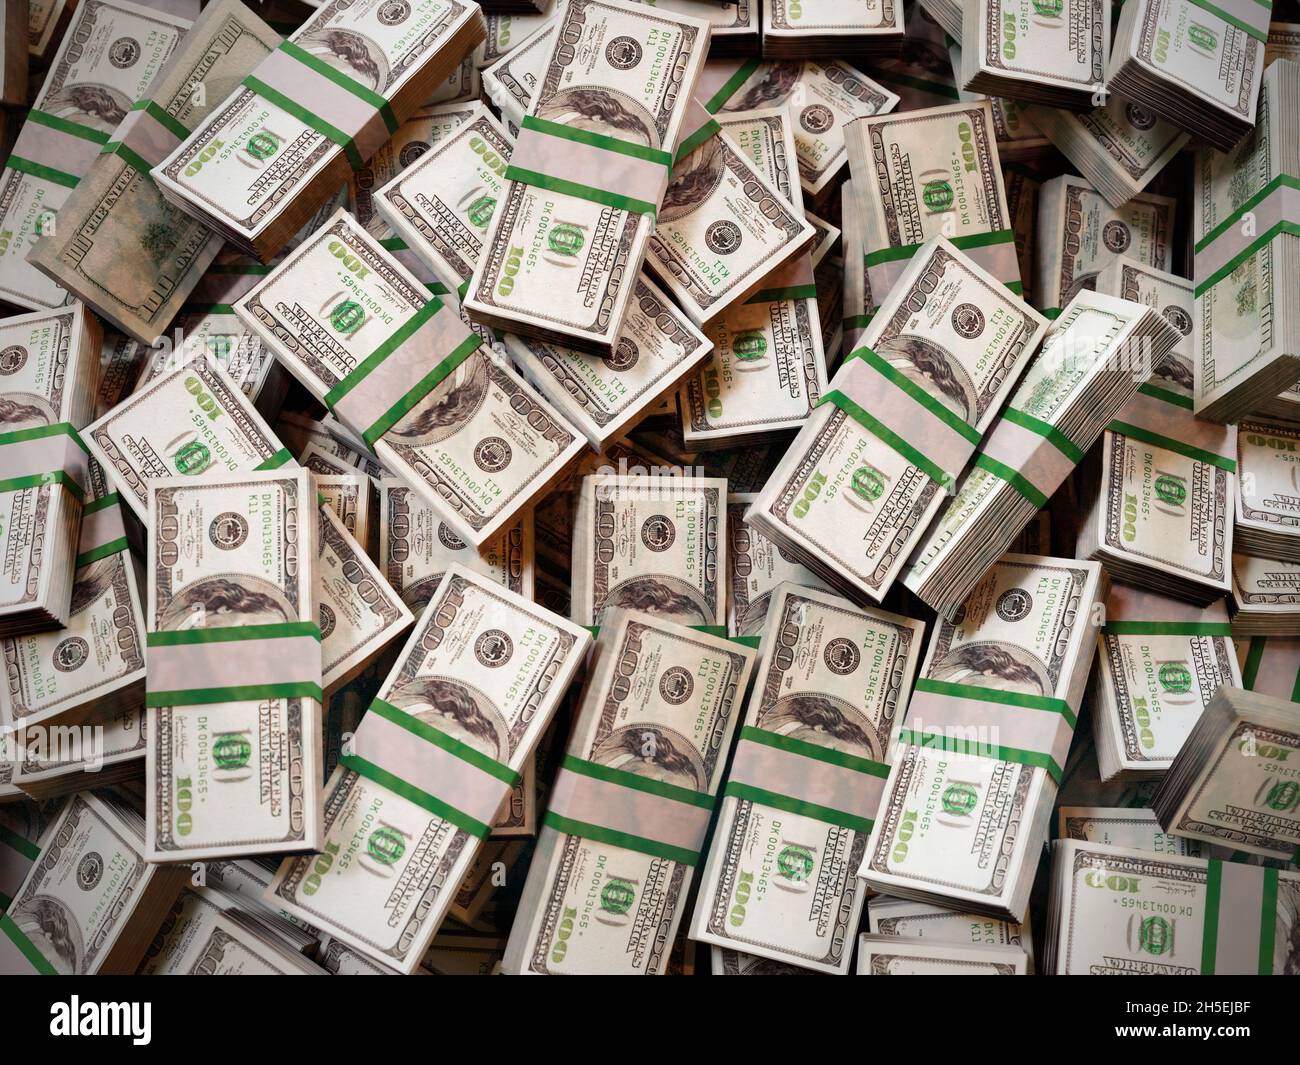 3D rendering of pile of 100 dollar bill wads shot from above Stock Photo